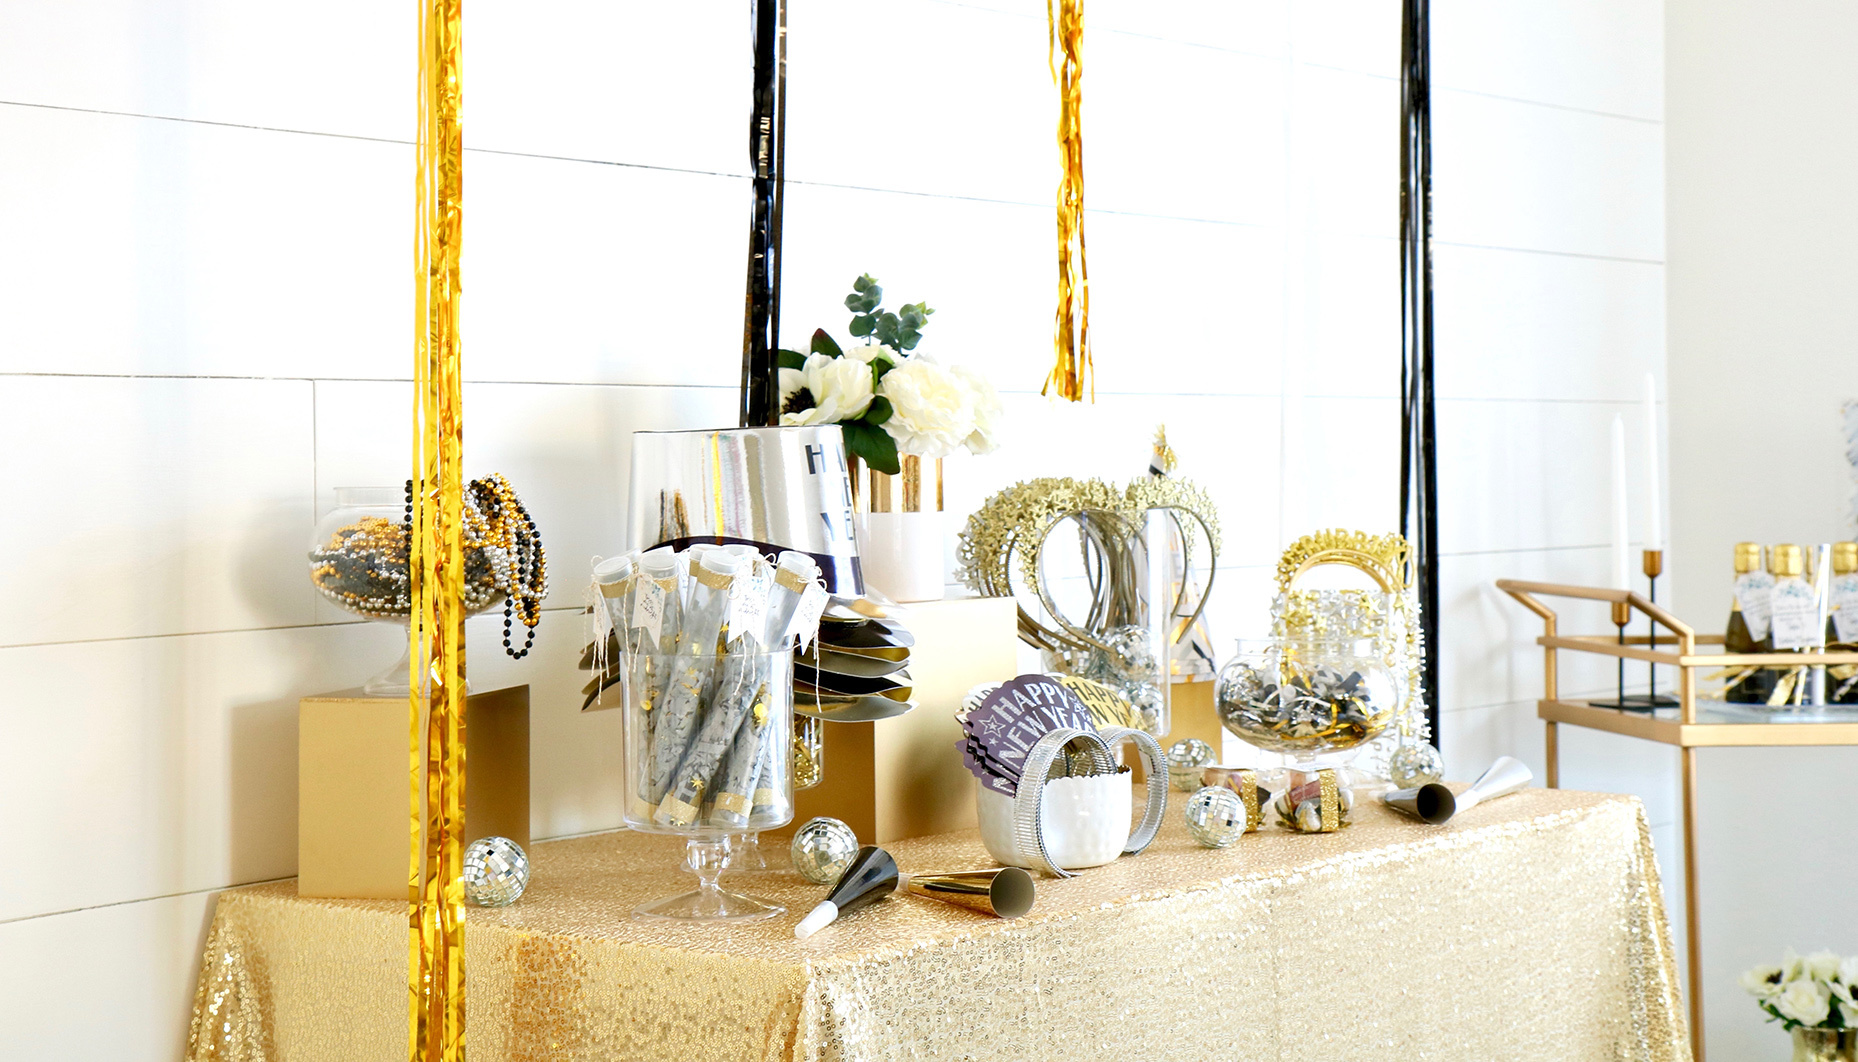 Black, White and Gold Table Decor